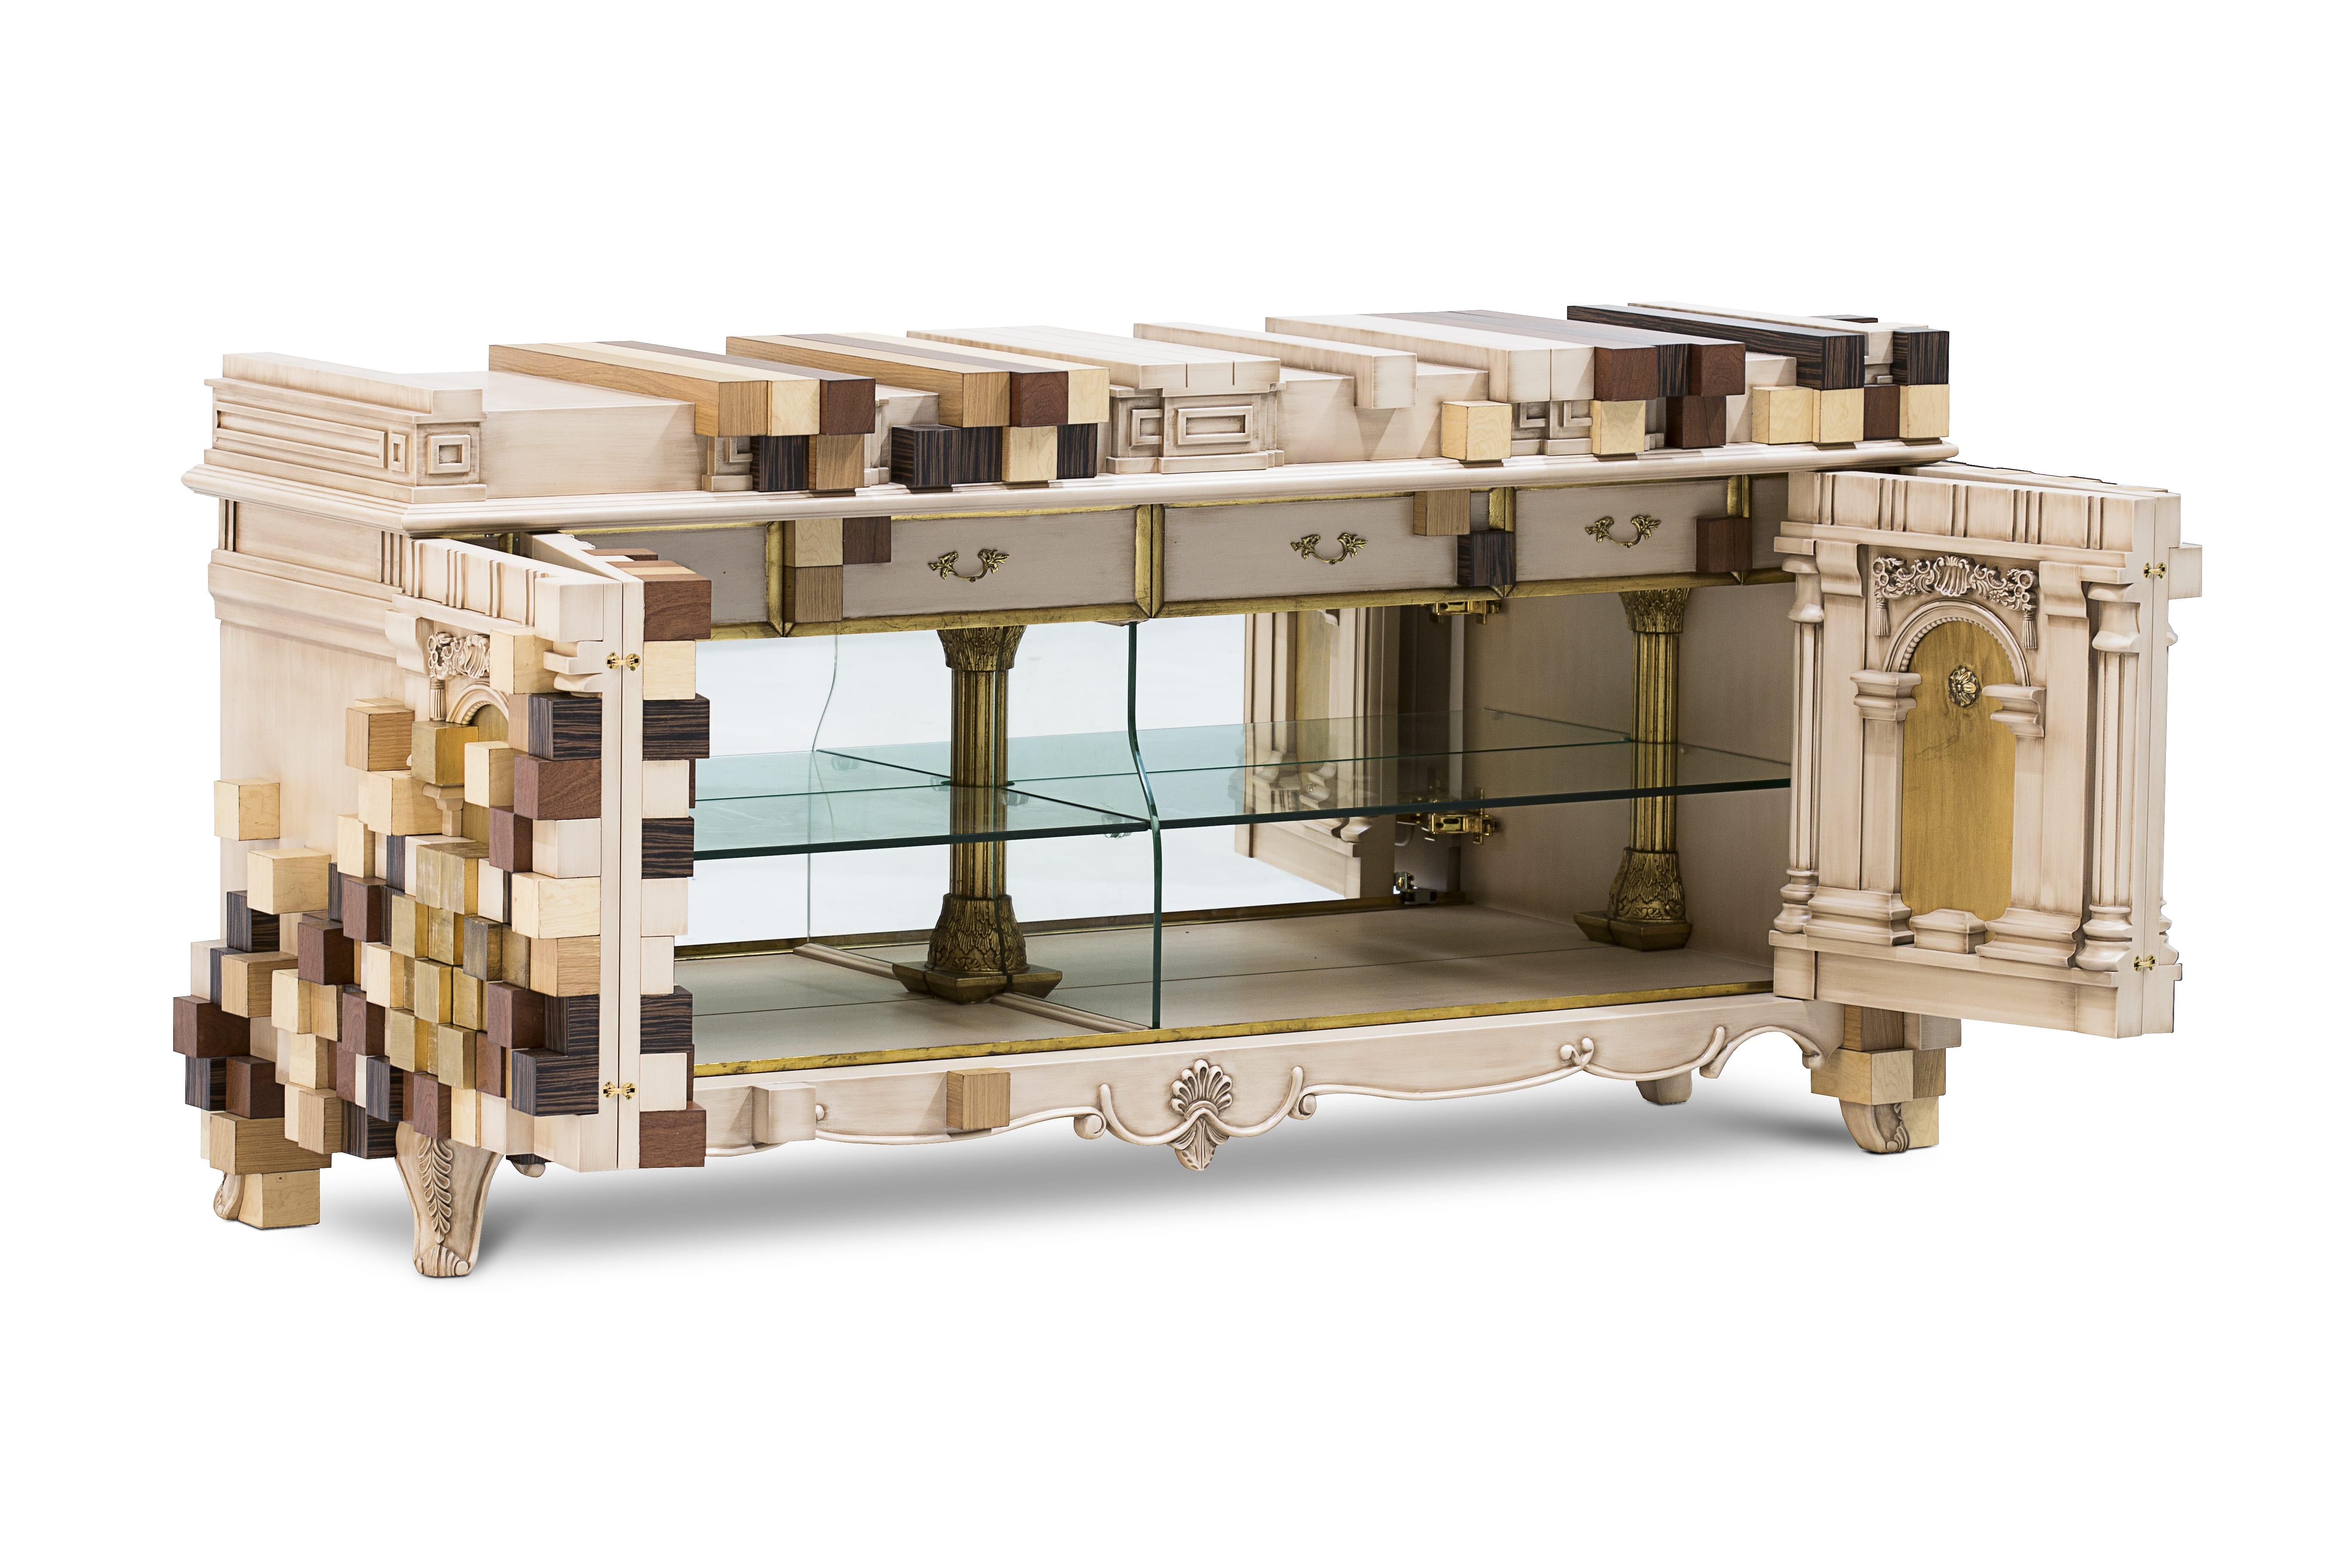 Piccadilly sideboard, another eternal present for you from Boca do Lobo, is an exclusive design piece that combines the dynamism of design with the power of narrative. Piccadilly sideboard is a highly expressive Limited Edition work, a precise